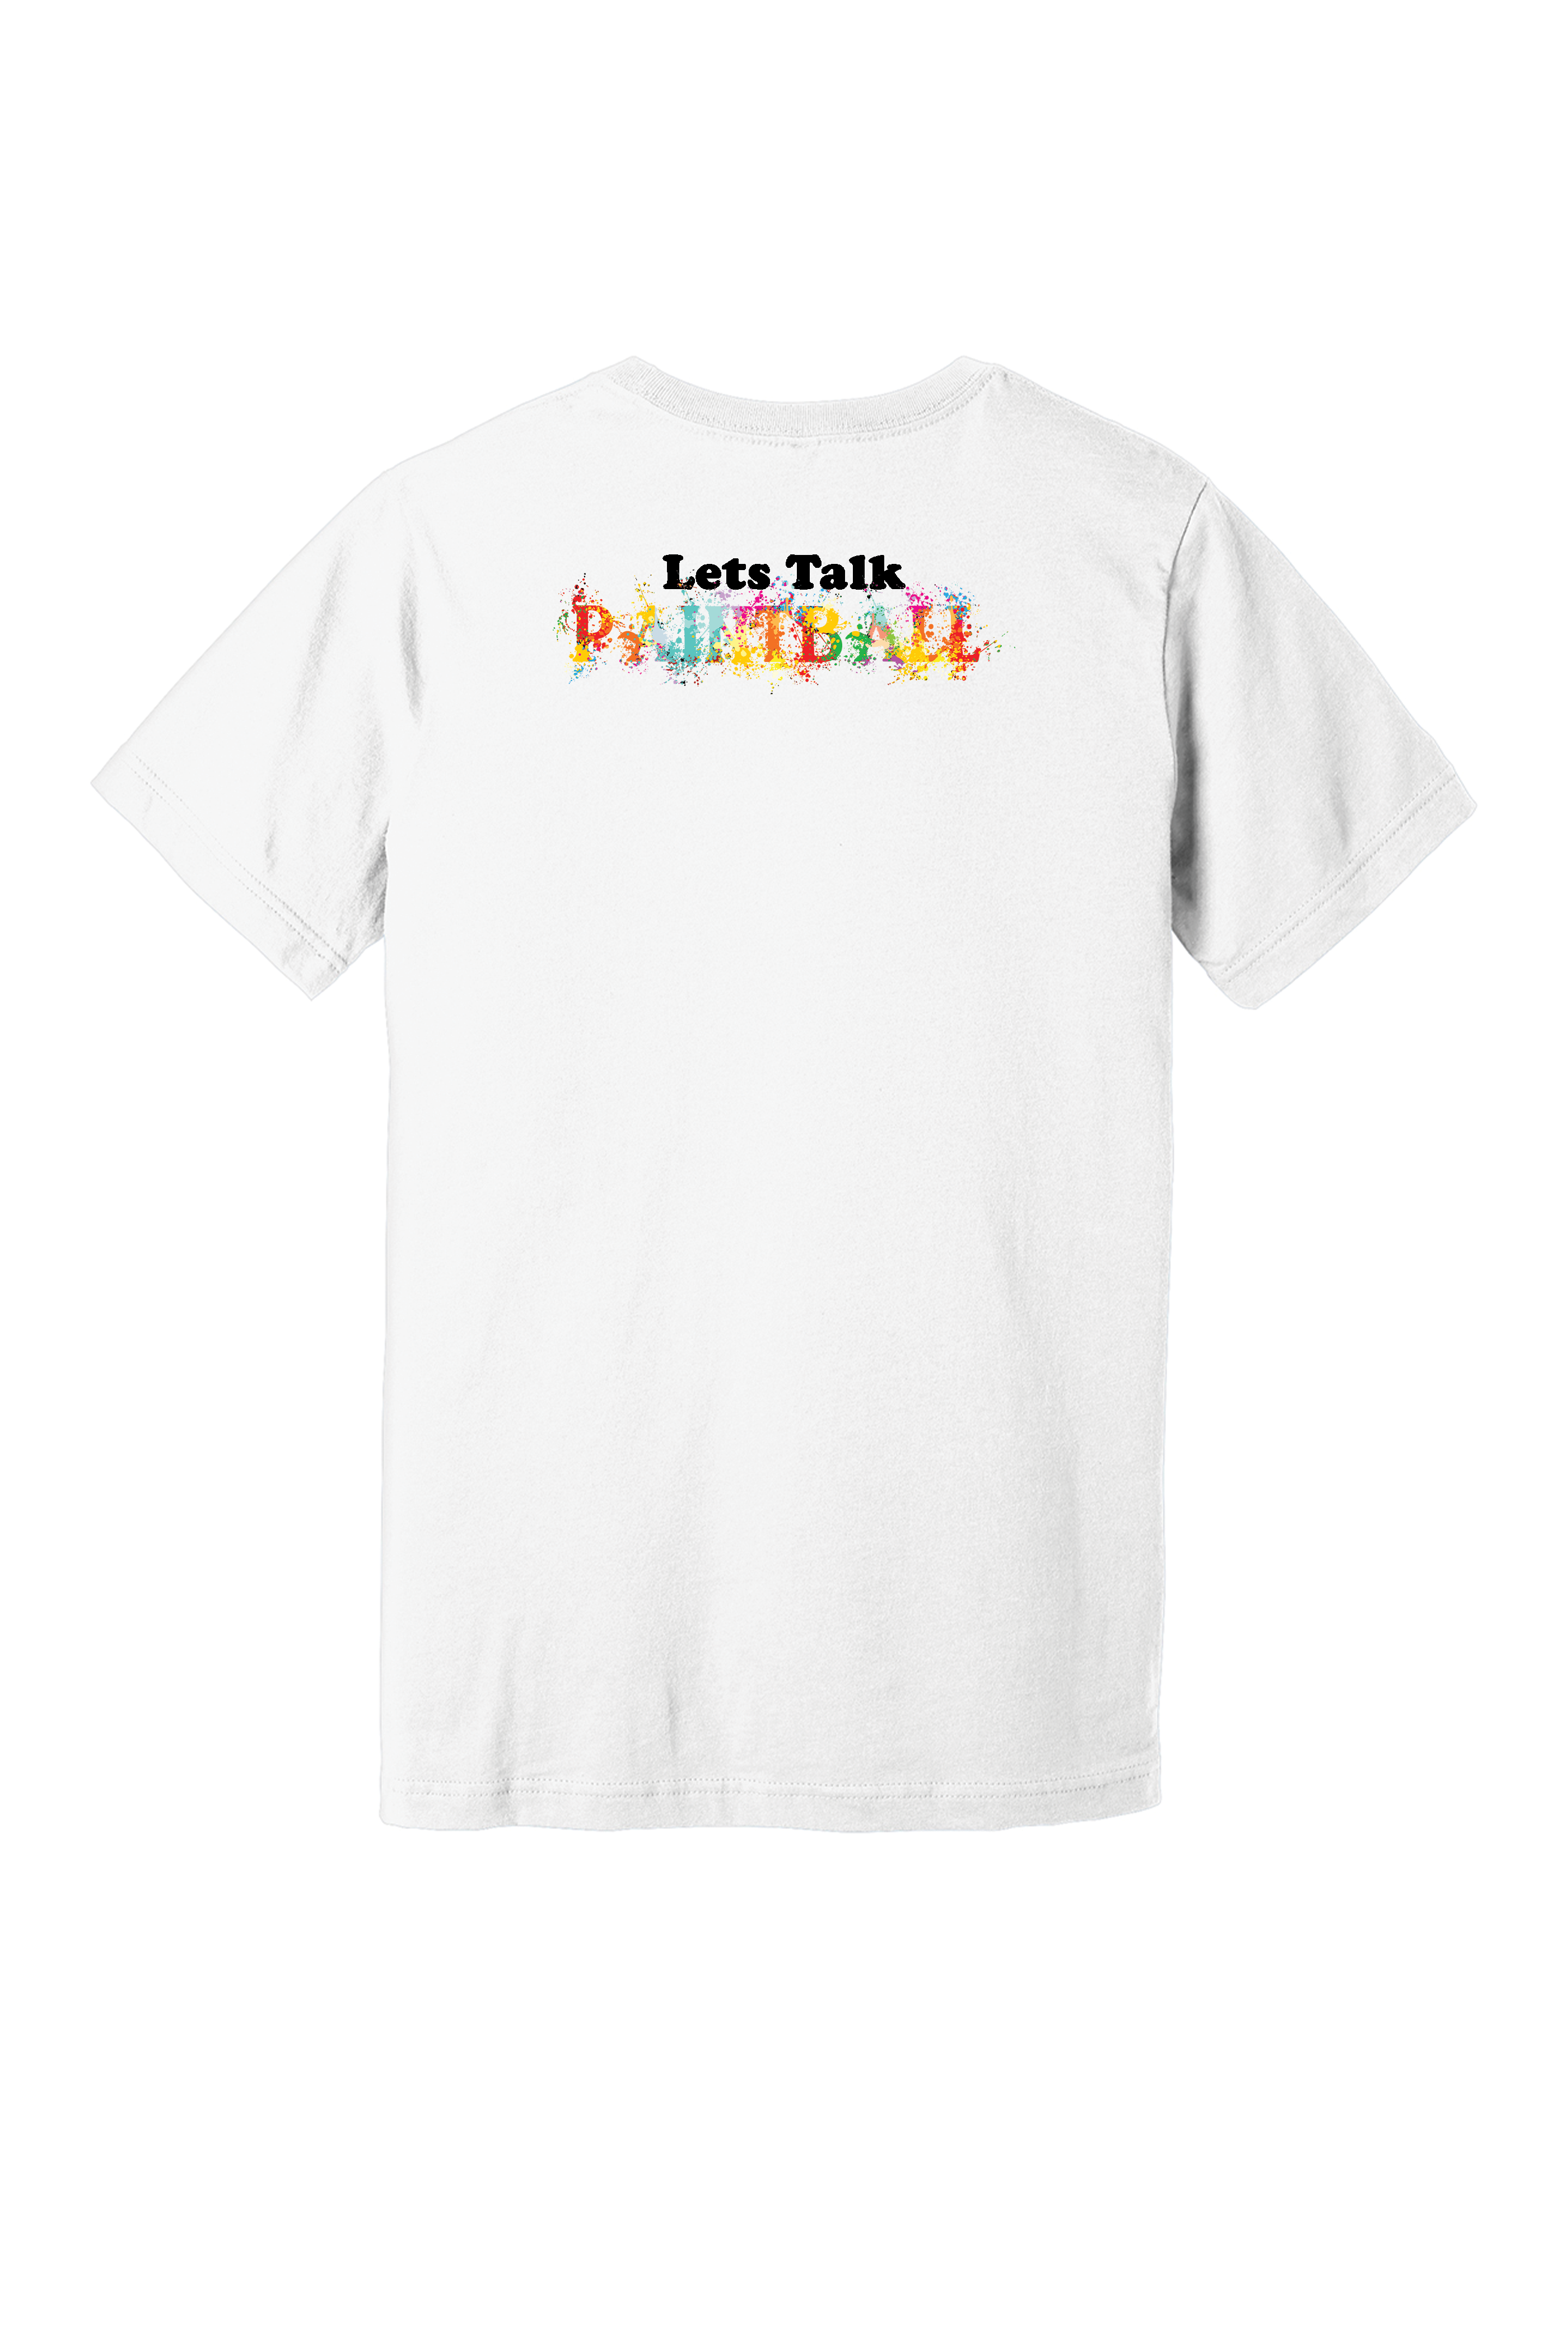 Lets Talk Paintball - White T